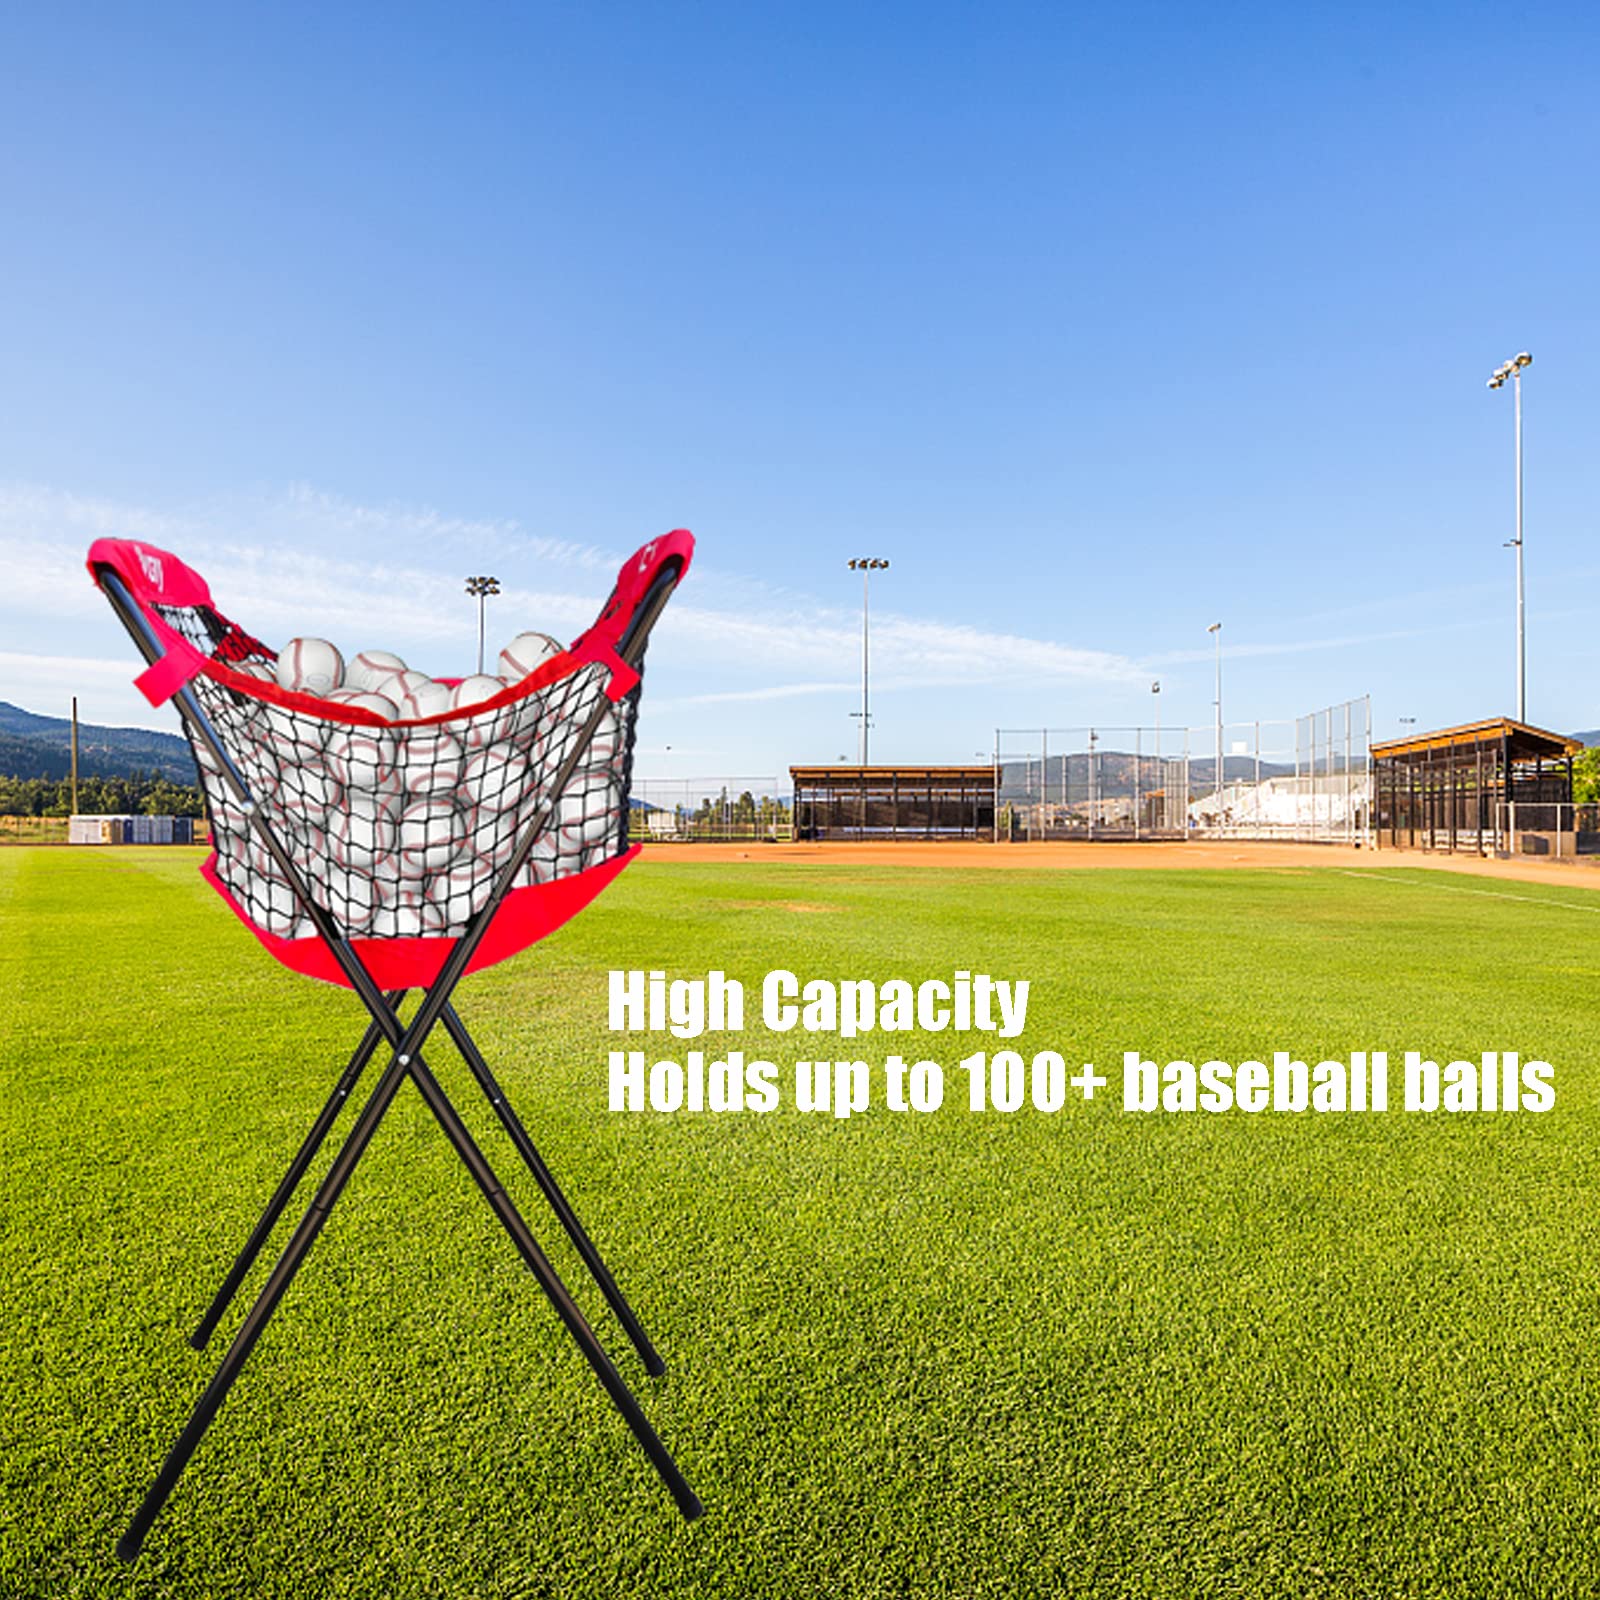 uvcany Baseball Caddy for Balls, Portable Large Capacity Ball Caddy for Baseball Softball Tennis Stand, Holds 100+ Baseballs or 50+ Softballs for Pitching or Batting Practice Training Drills